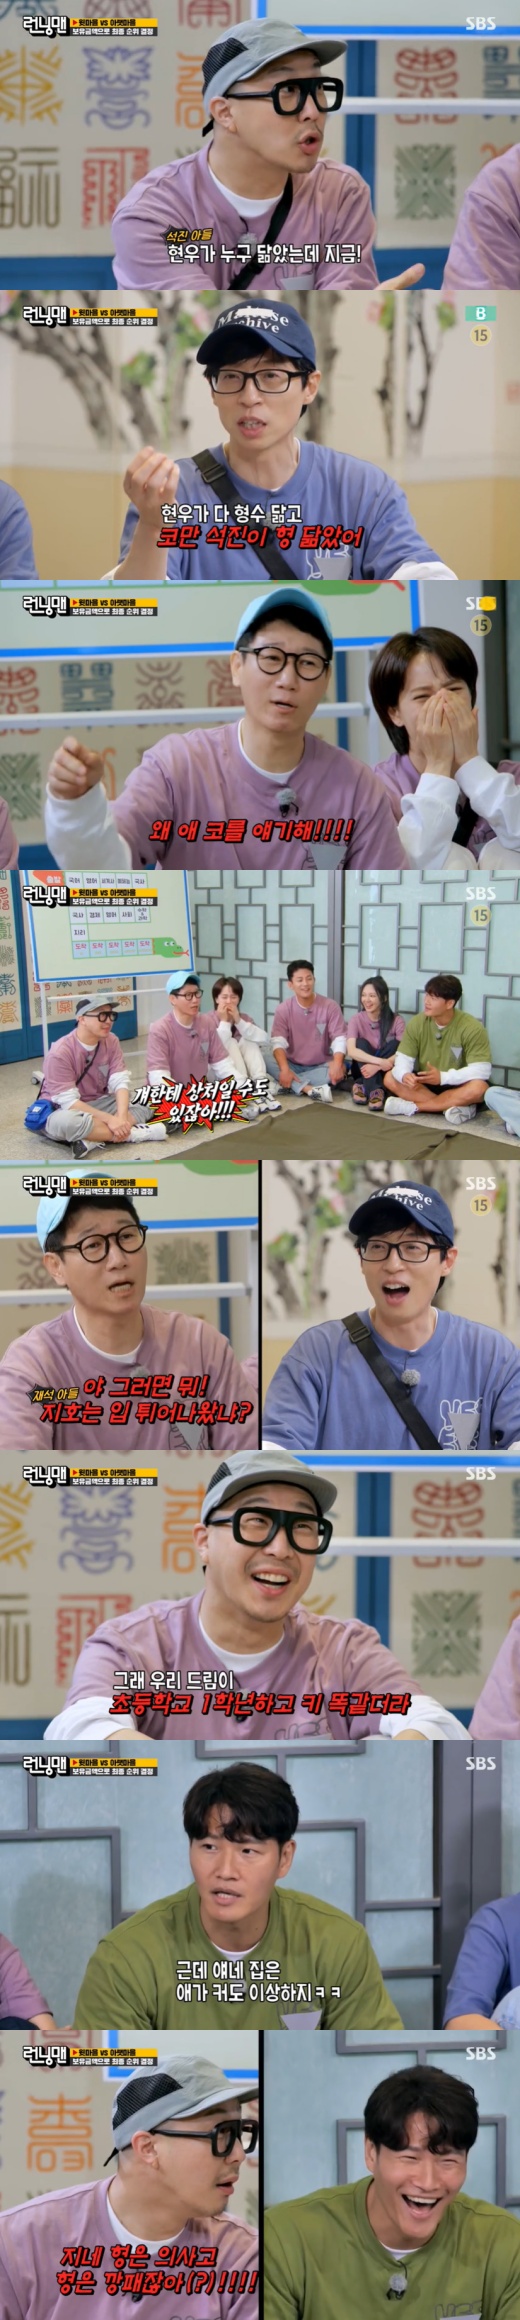 The cast of SBS Running Man argued with their childrens appearance.On the afternoon of the 8th, Running Man, the usual best friend and guest guest and Angsuk Chemie Race were held. Among them, a tight nervous battle was held in the quiz showdown.In the knowledge-matching Mission, Ji Suk-jin expressed confidence, saying, Yoo Jae-Suk is my stop.He emphasized the title of Aju University Business Administration Department and laughed at the joke Did you go to the test?I think Hyun-woo (Ji Suk-jin son) looks like someone now ... wise, said Haha, a Ji Suk-jin team.Yoo Jae-Suk then joked, You look a lot like Hyun-woo, you look like your sister-in-law, and you look like Koman Seokjin.Why tell me your nose, it could be a wound to him! said the wobbly Ji Suk-jin, So did JiHo (Yoo Jae-Suk son) pop out of his mouth?Yoo Jae-Suk was embarrassed, saying, Why do you talk about JiHo, why do you go to a child war among your family?Haha, who listened to the conversation, said, Our dream is the same as the first grade in elementary school. Kim Jong Kook said, Your house is strange even if you are tall.When Mom Father ... blurred the end, Haha said, Our Father is 180cm. Your brother is a doctor and you are a gangster!Yoo Jae-Suk married Na Kyung-eun in 2008, with a 13-year-old son and a 5-year-old daughter; Ji Suk-jin has a 21-year-old son.Haha, who is married to singer Star, is raising three siblings, including a 10-year-old son, a six-year-old son and a four-year-old daughter.